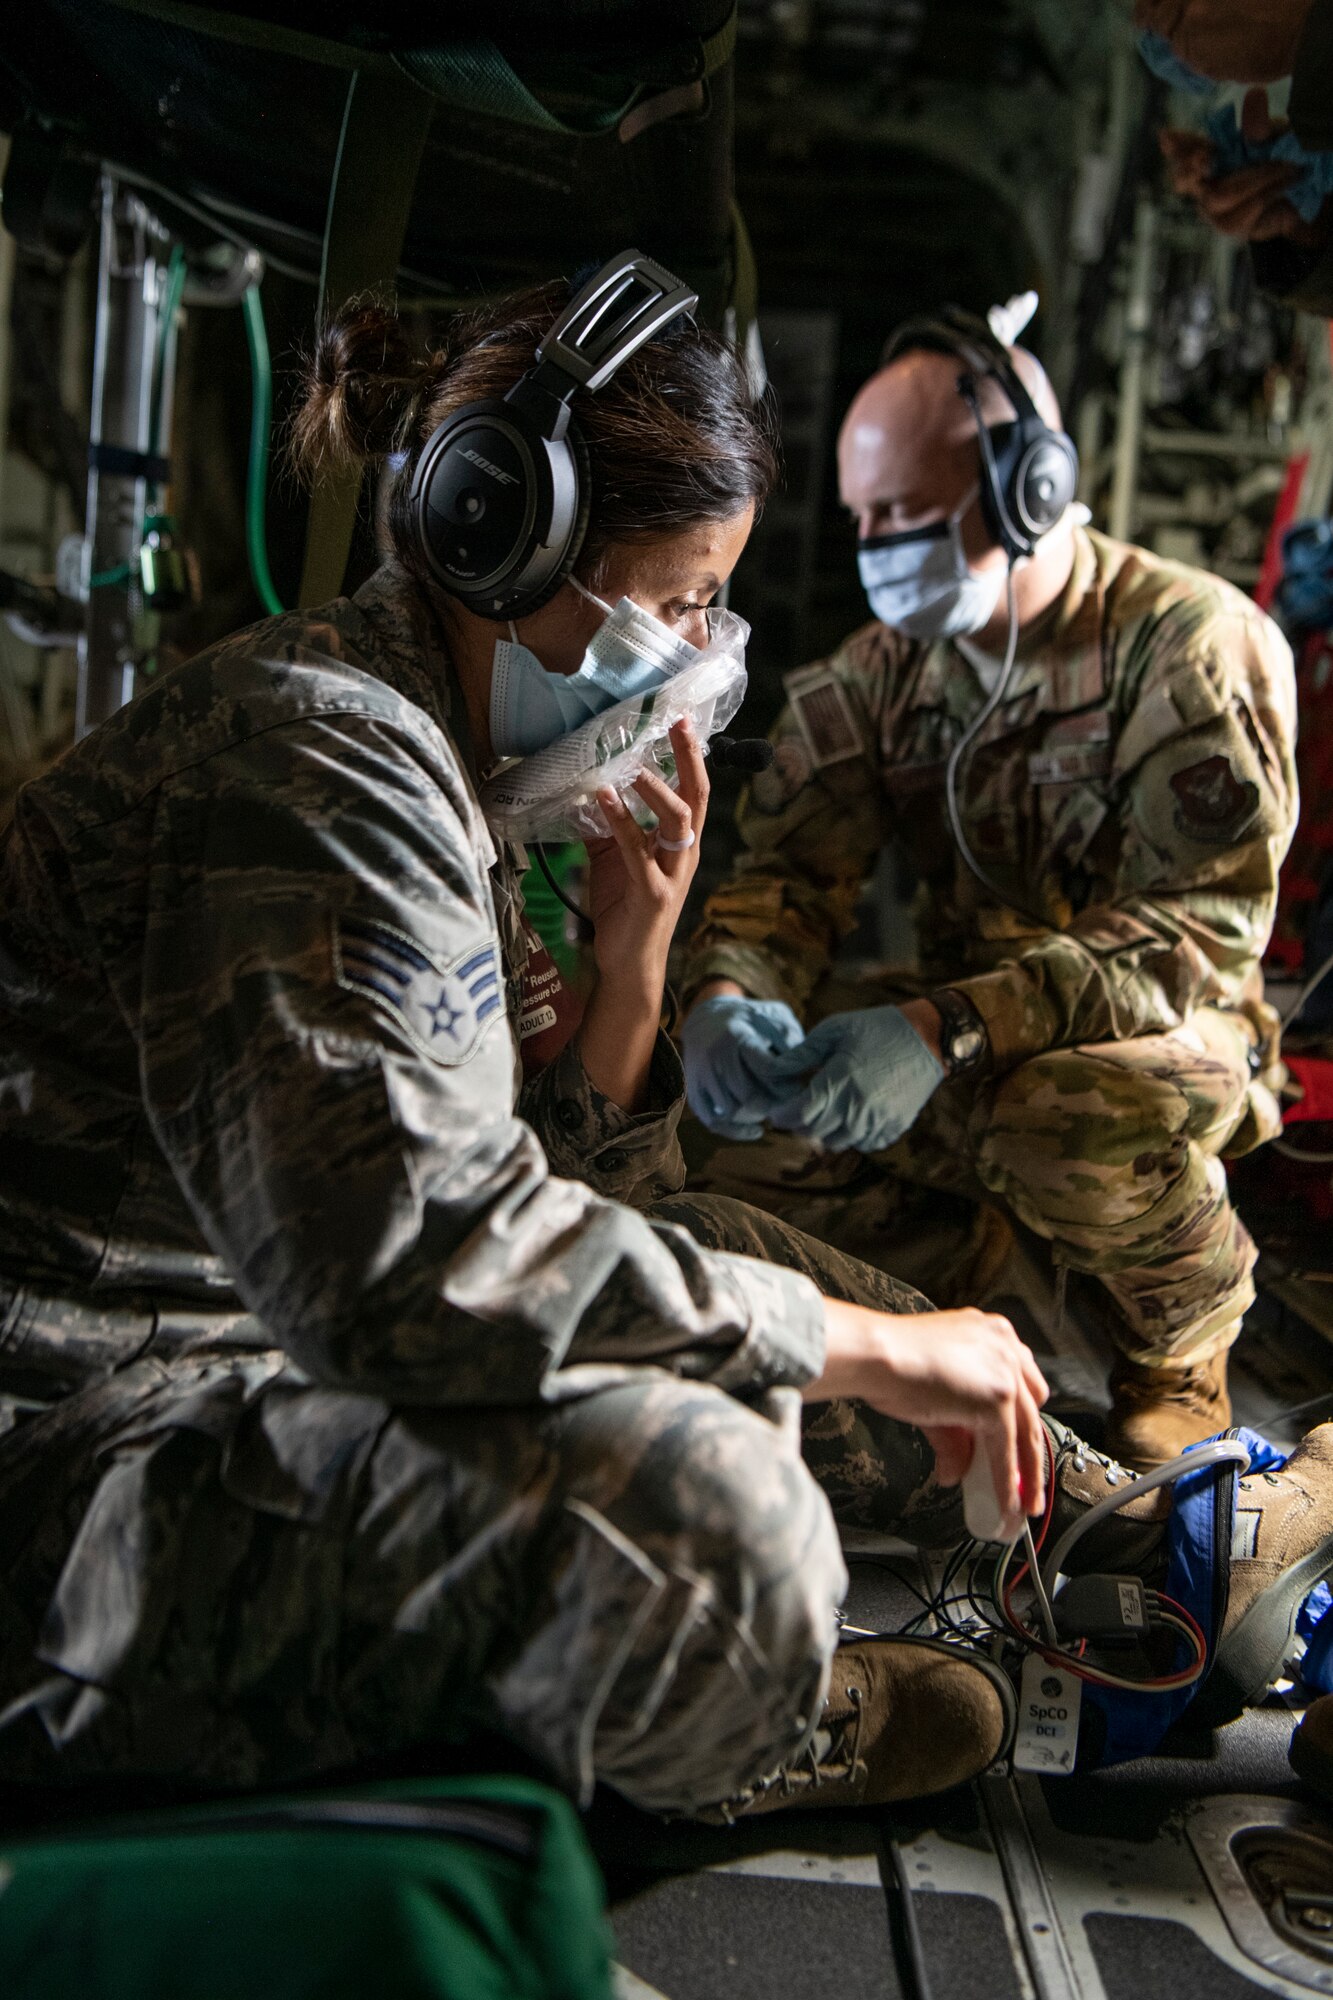 Airmen with  923nd Airlift Wing, Aeromedical Evacuation Squadron, conduct Aero Medical Evacuation Readiness Mission (ARMS-Mission) training, on a C-130J from 314th Airlift Wing, August 6, 2020. ARMS-Mission training is required for AES Airmen to maintain their mission readiness.(U.S. Air Force photo by Senior Airman Brooke Spenner)